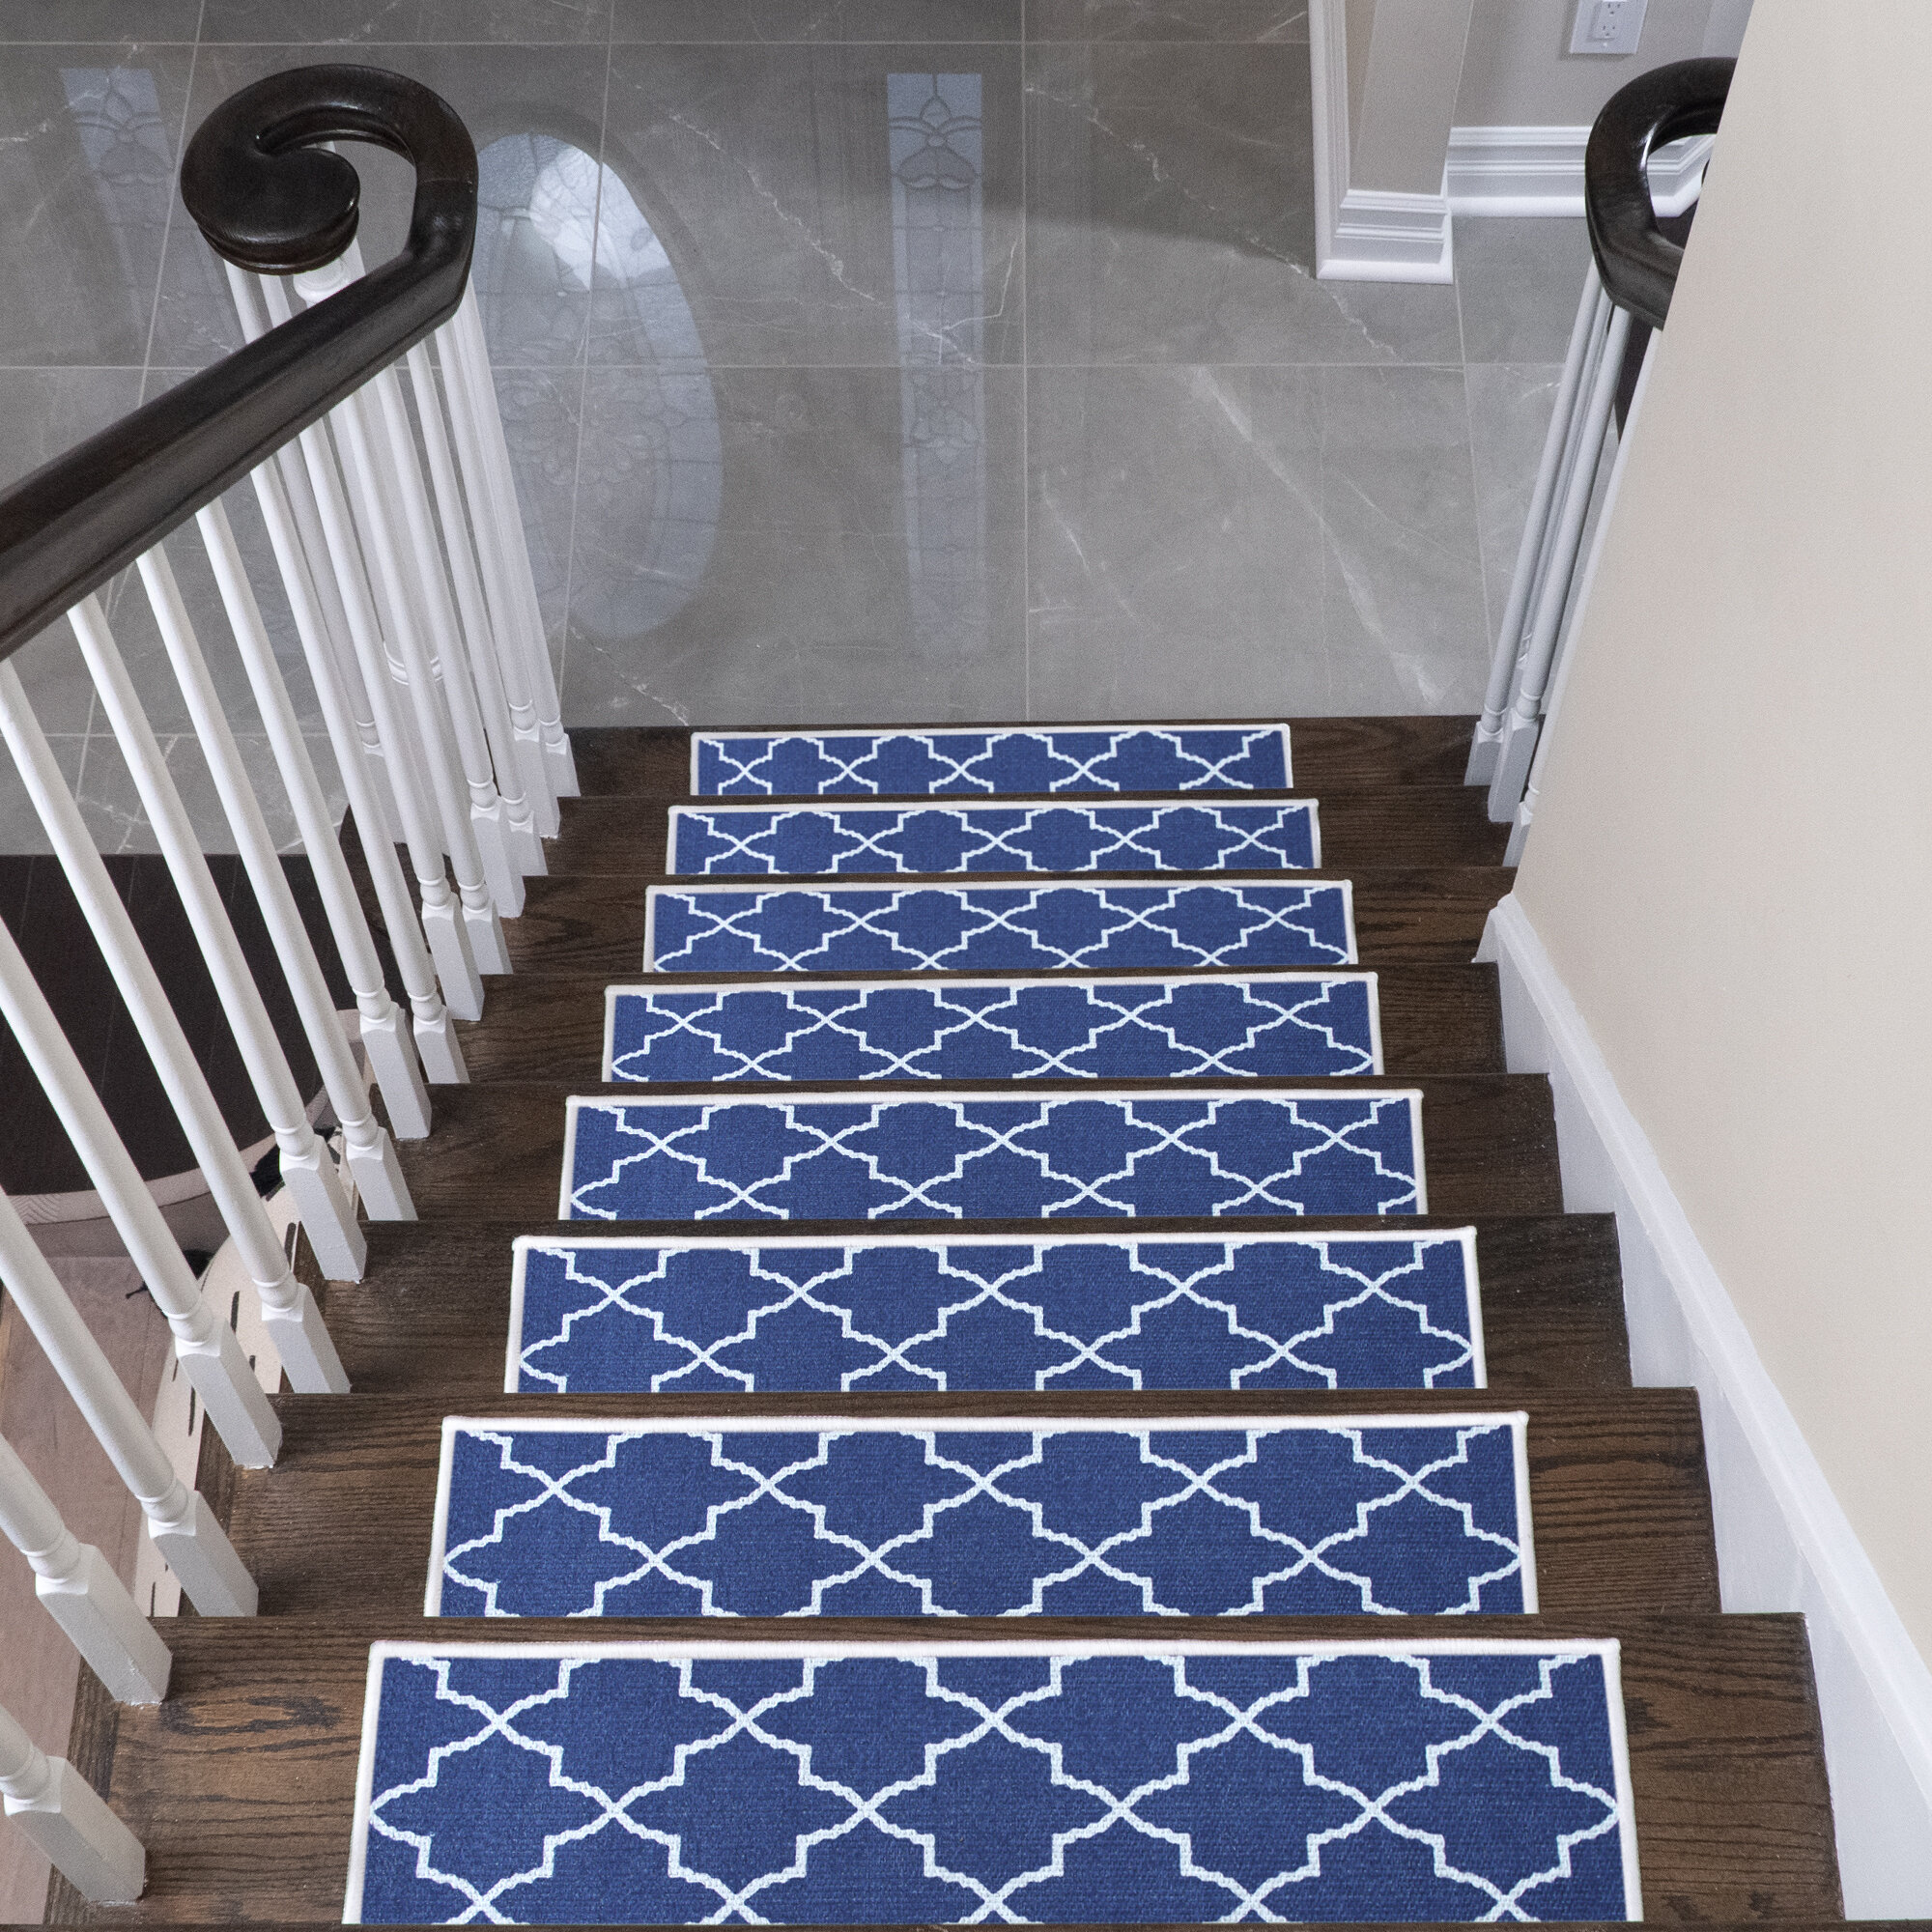 Details about   13 = Step Stair Treads Staircase Step Rug Carpet 9'' x 20''. 